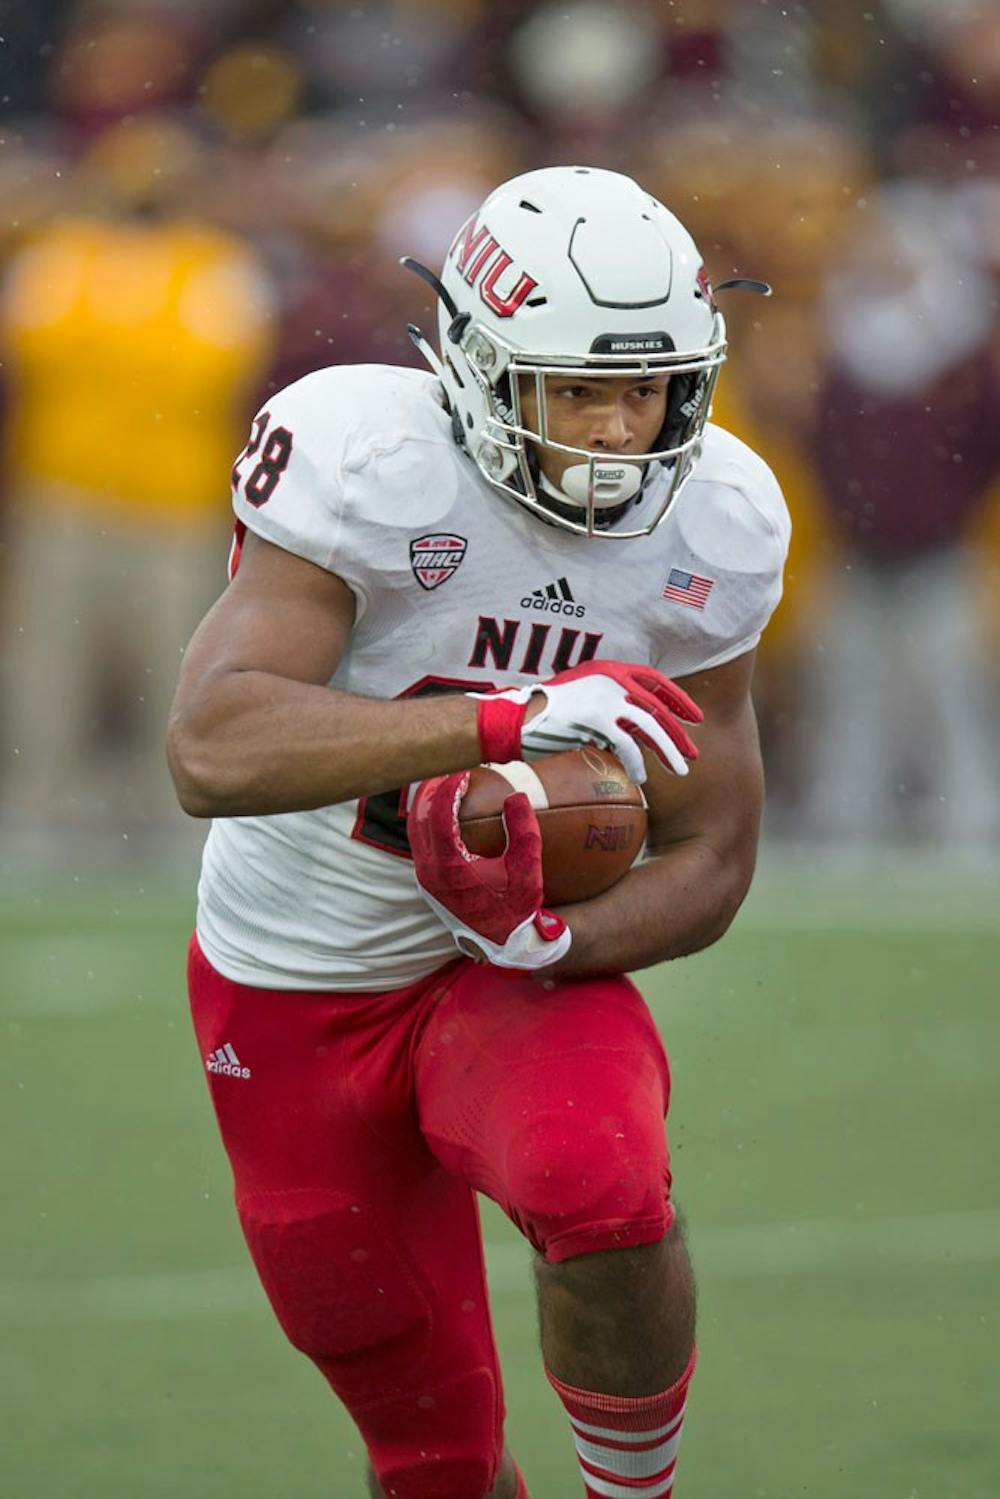 <p>Against,&nbsp;Central Michigan on Oct. 3. Northern Illinois running back Joel&nbsp;Bouagnon ran for 104 yards on 26 carries with two touchdowns. <em>The Spectrum </em>gave the Huskies the edge in running backs.&nbsp;</p>